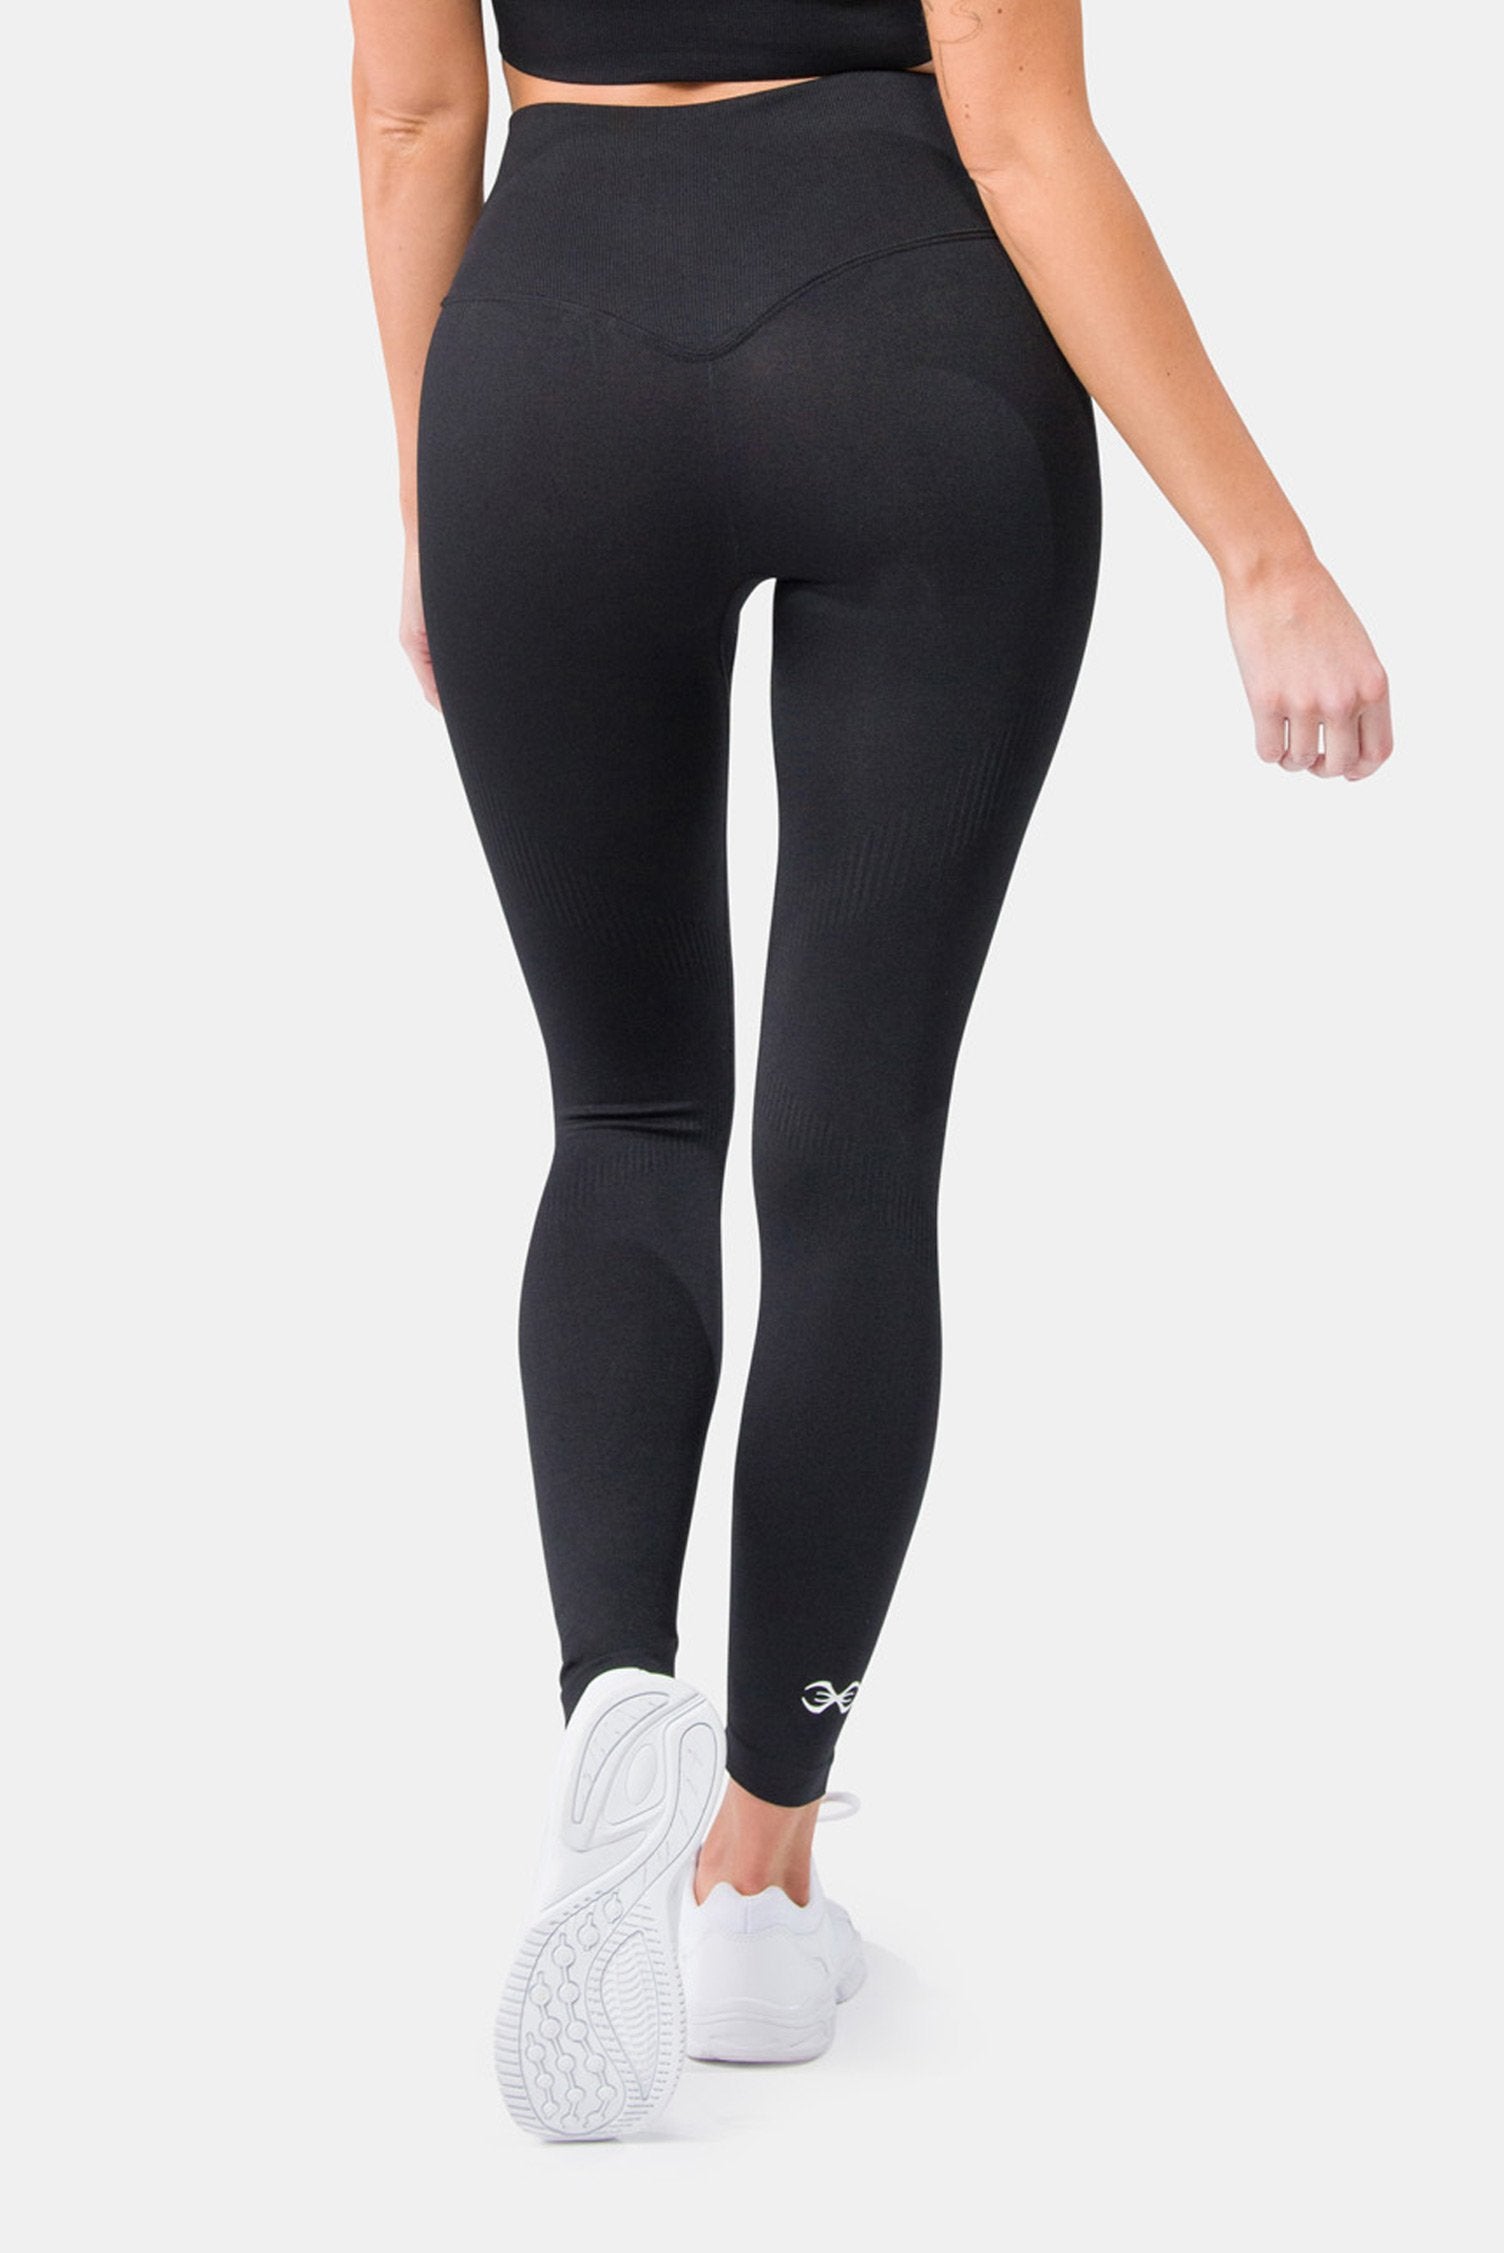 Seamless Leggings for Tall Women in Black XL / Tall / Solid Black